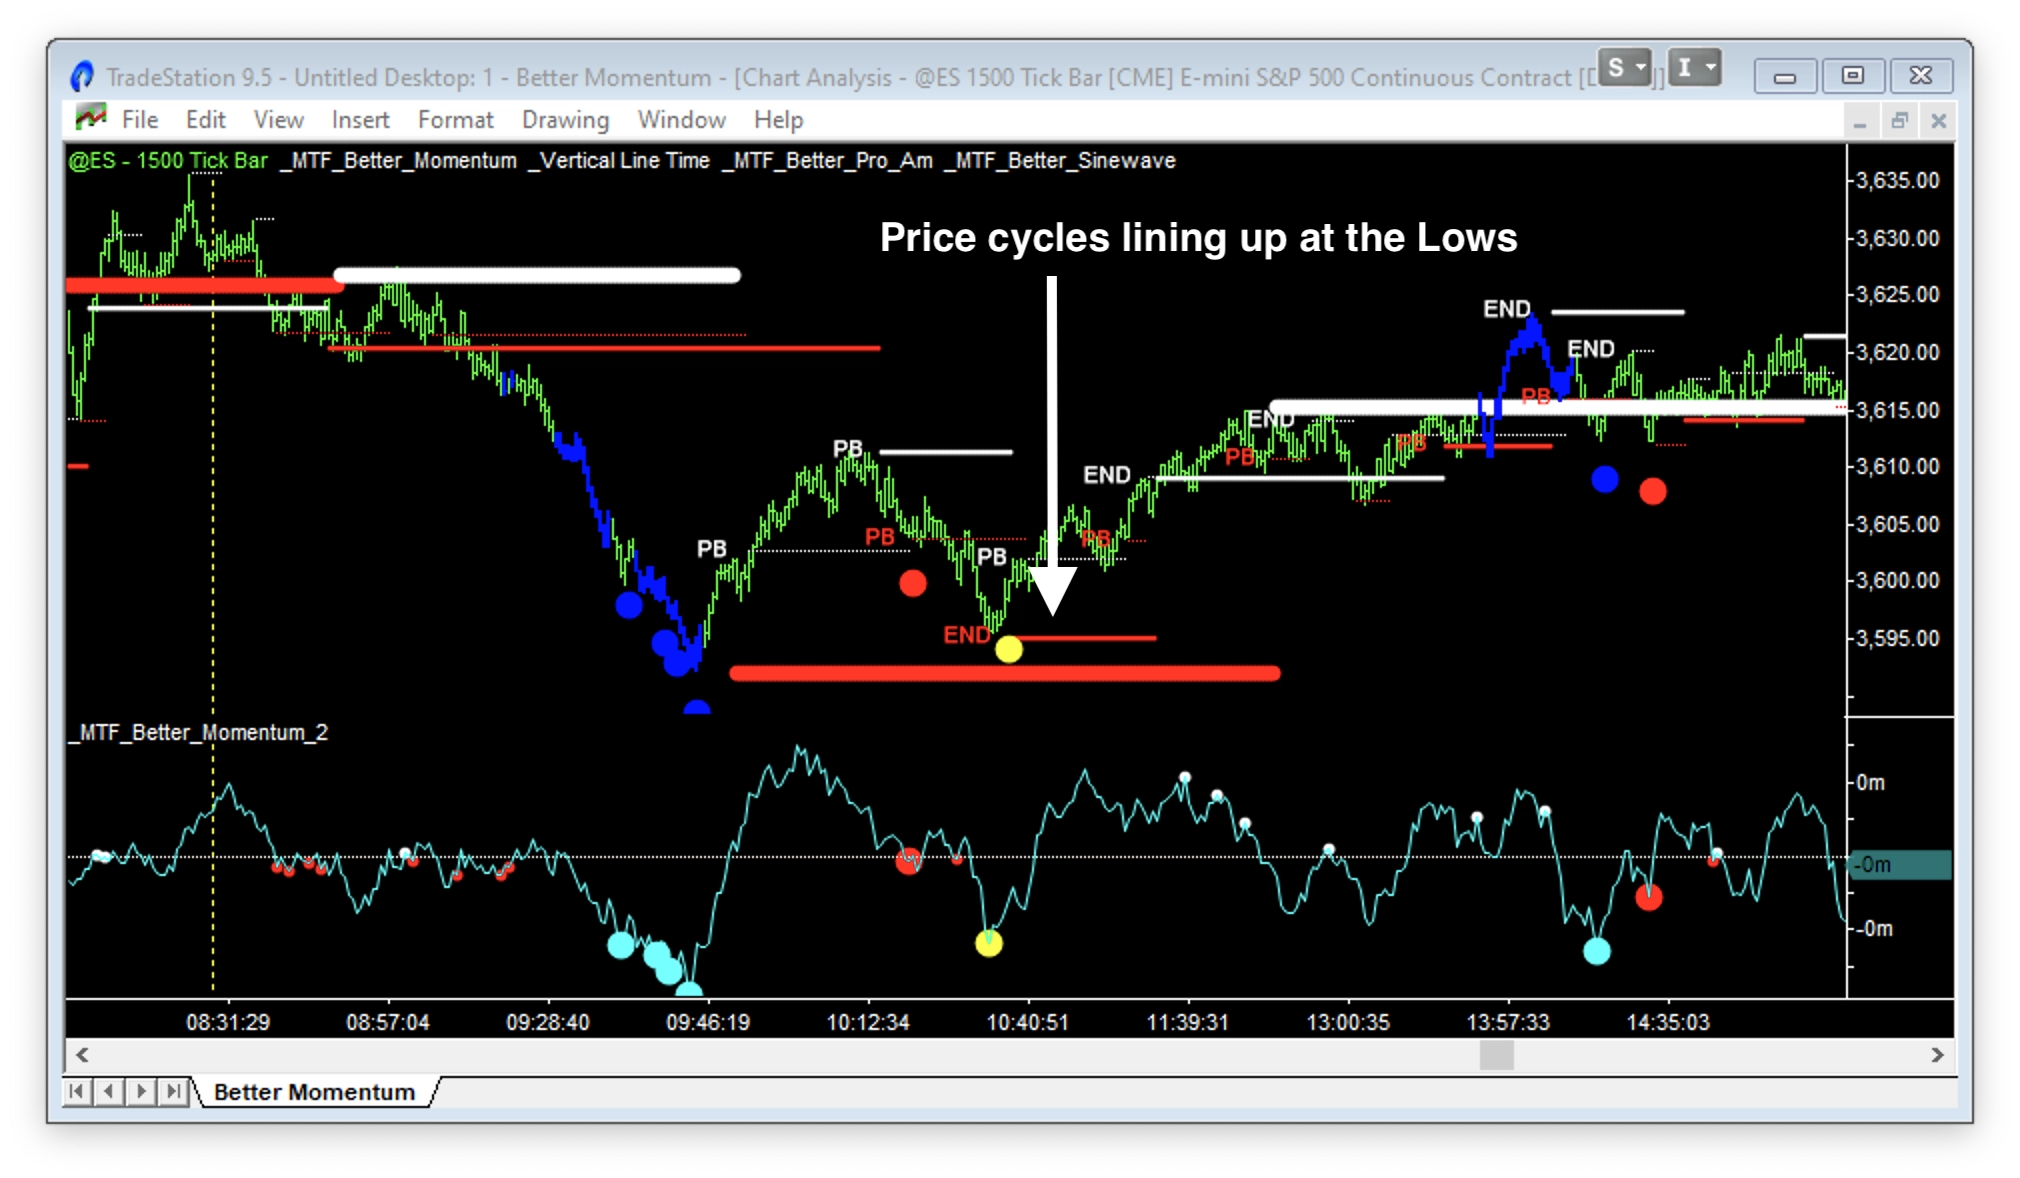 better sine wave showing price cycles lining up at the lows